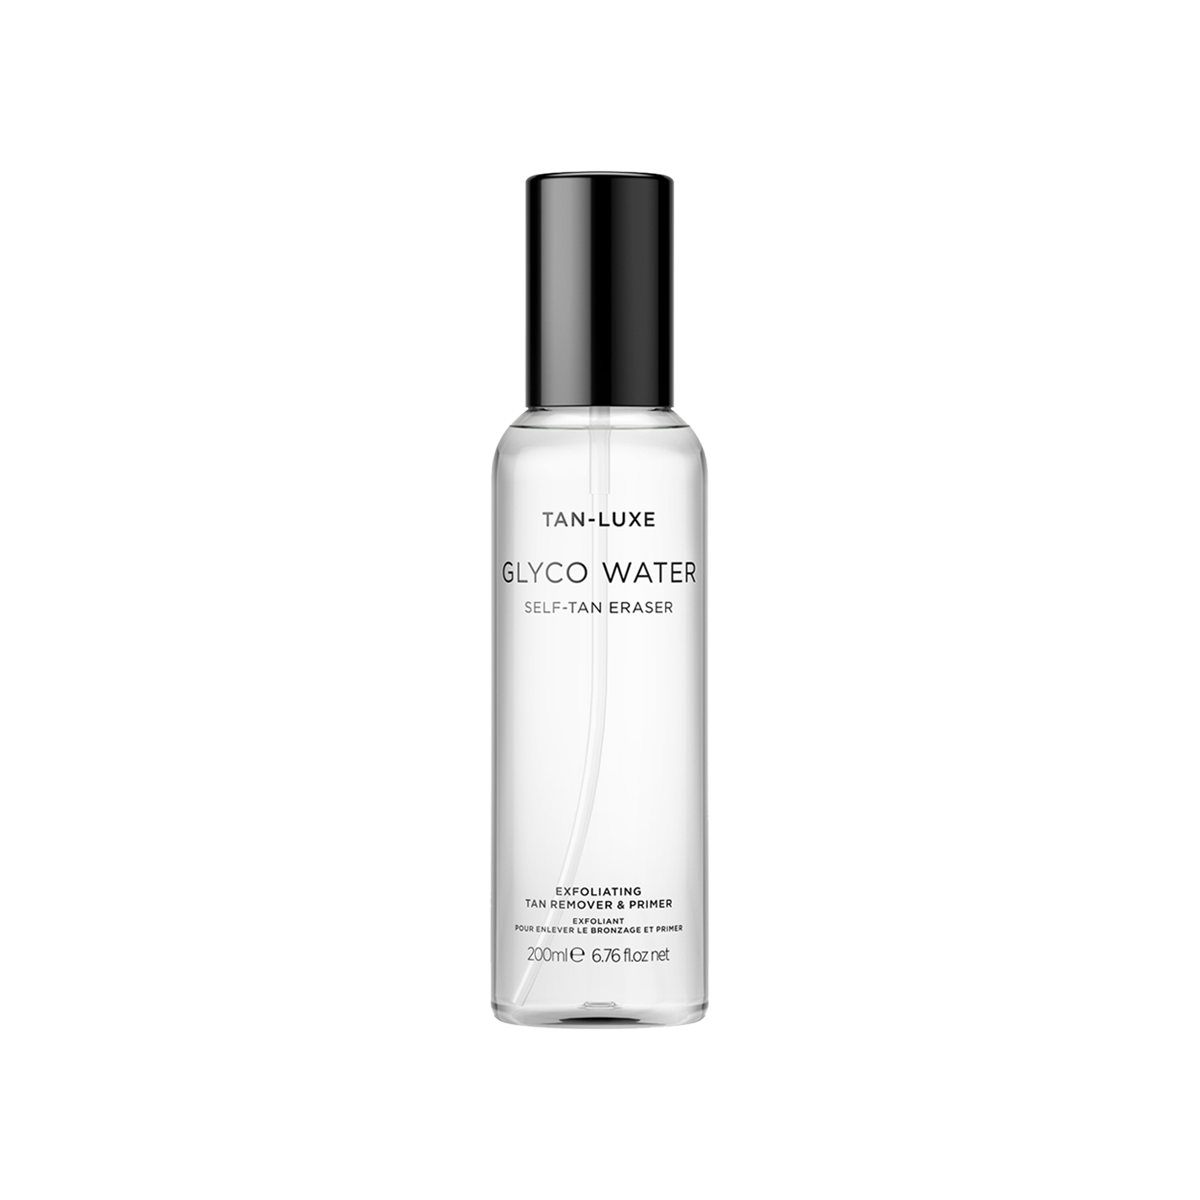 TAN-LUXE - Glyco Water